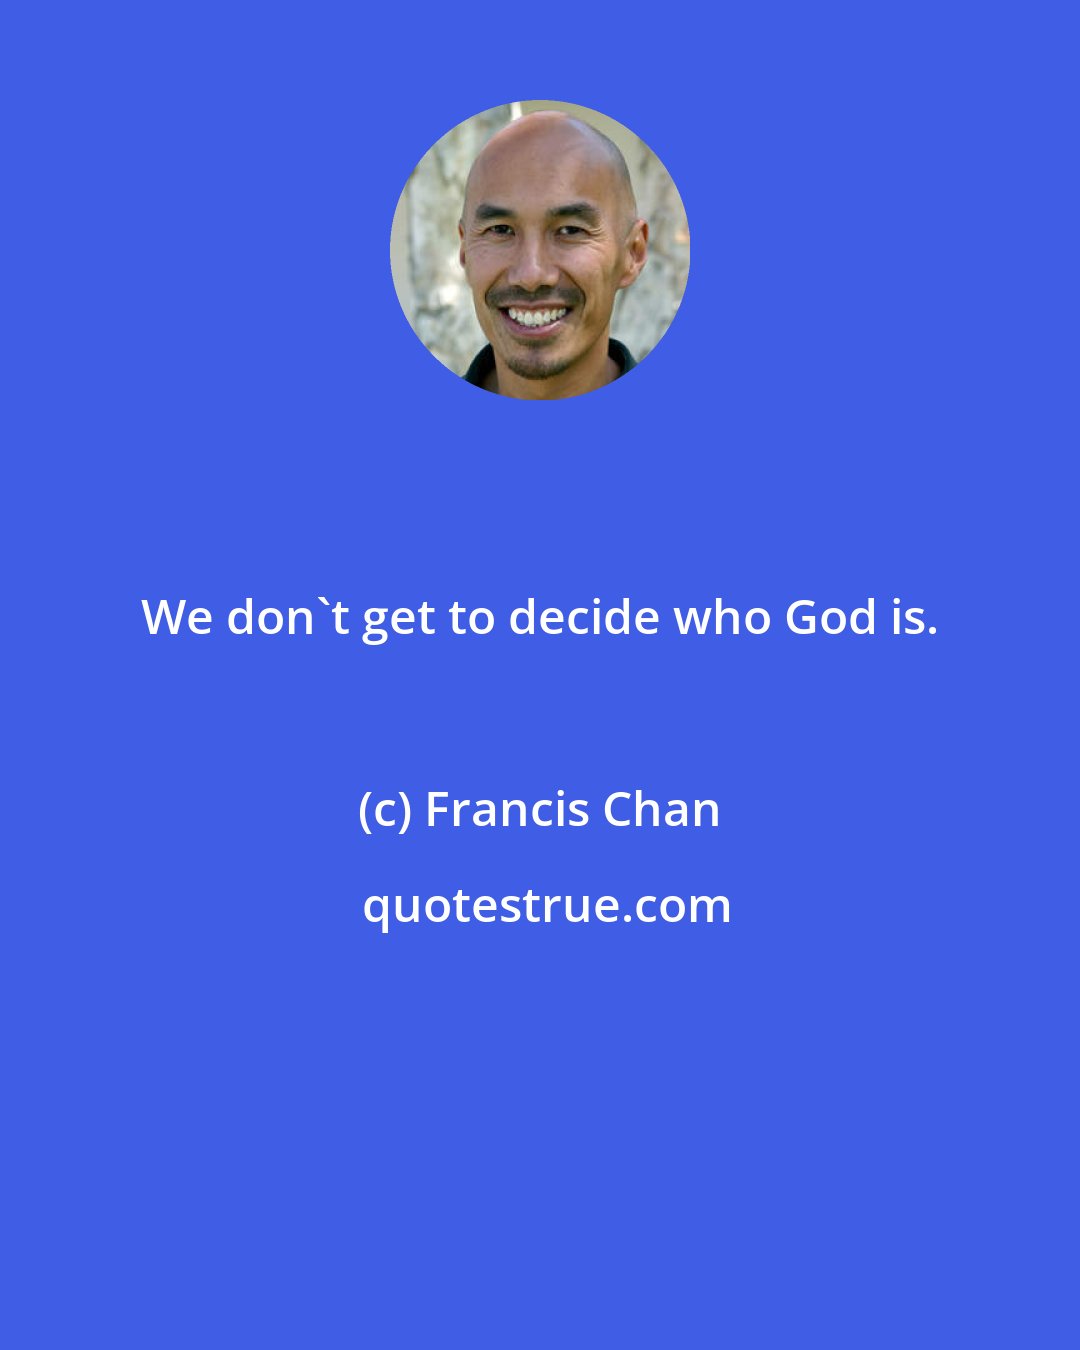 Francis Chan: We don't get to decide who God is.